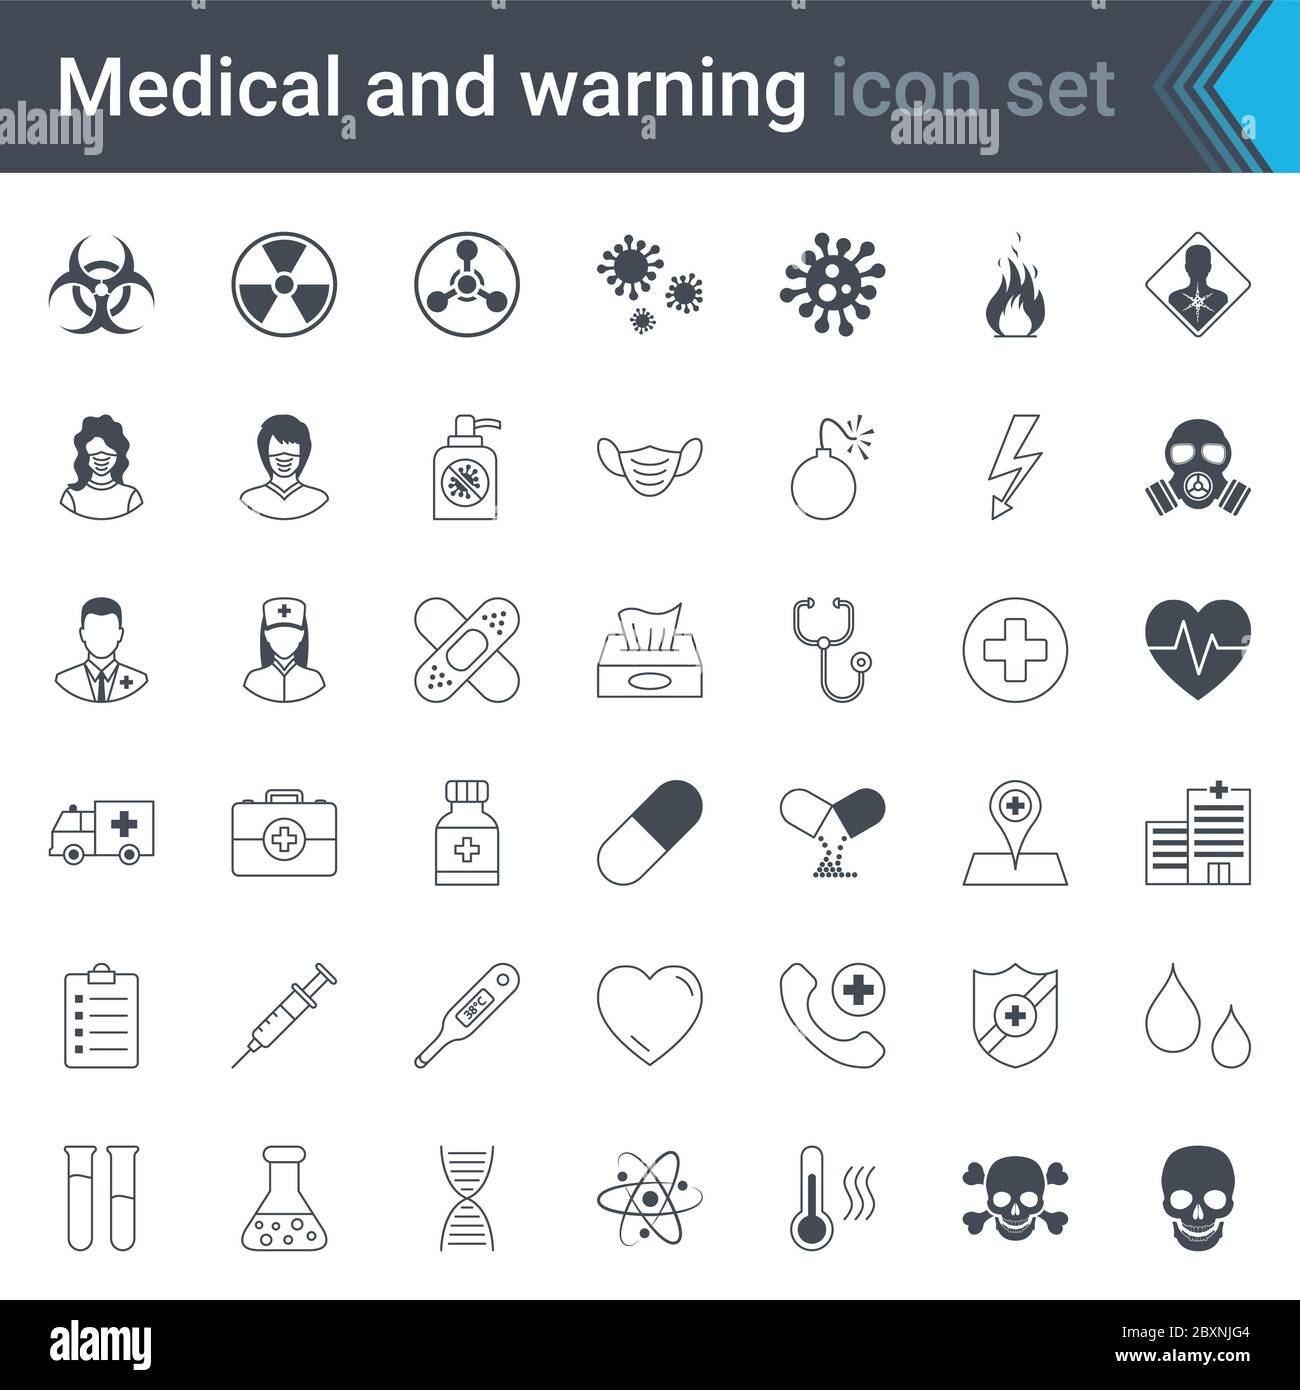 Medical, warning and hospital stroked icons. High quality hazard, danger and medical symbols and elements. Virus warning, protection and health care. Stock Vector